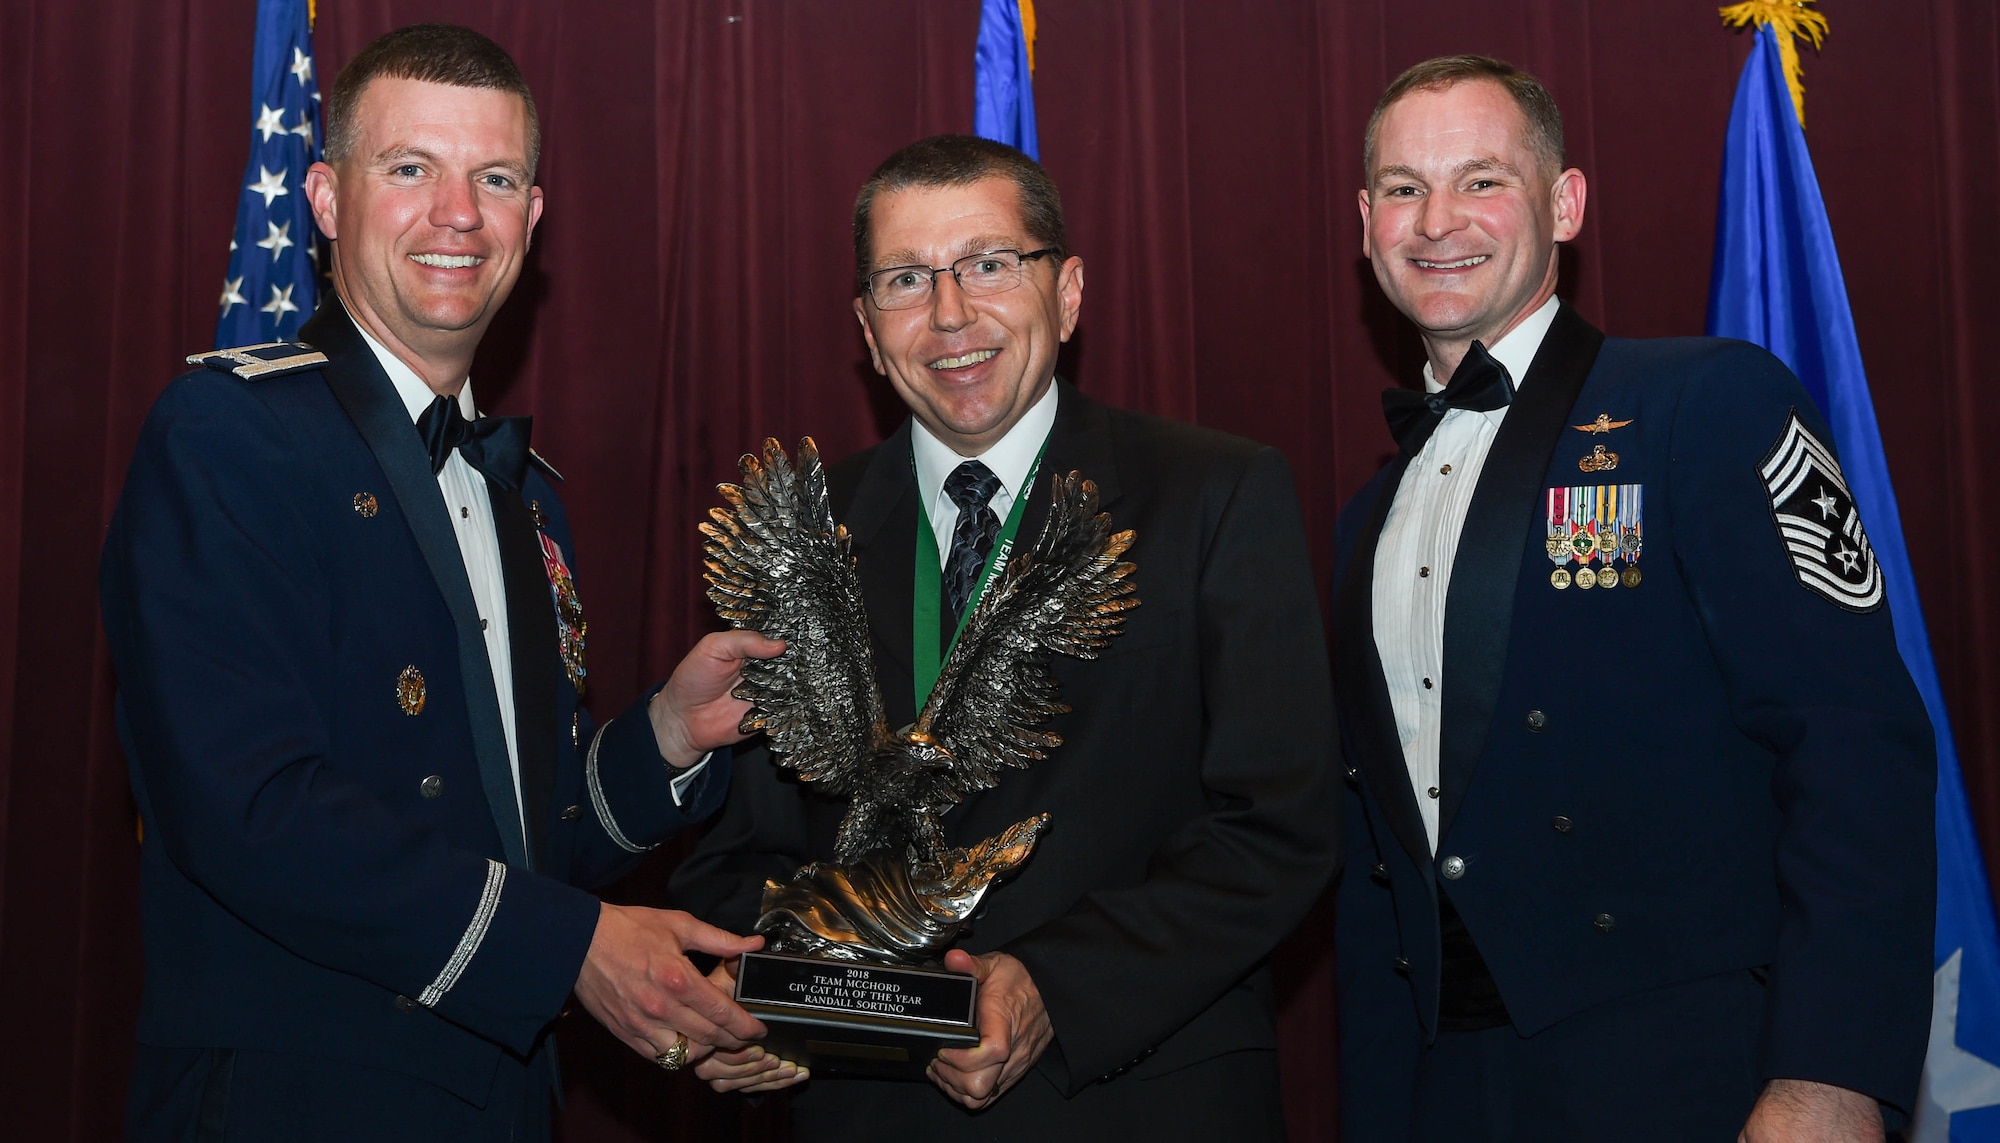 Randall Sortino, 361st Recruiting Squadron, accepts the Civilian Category IIA of the Year award during the 2018 Team McChord Annual Awards Banquet at the McChord Field Club, Joint Base Lewis-McChord, Wash., Feb. 22, 2019. The annual award included both civilian and military members of Team McChord. (U.S. Air Force photo by Senior Airman Tryphena Mayhugh)